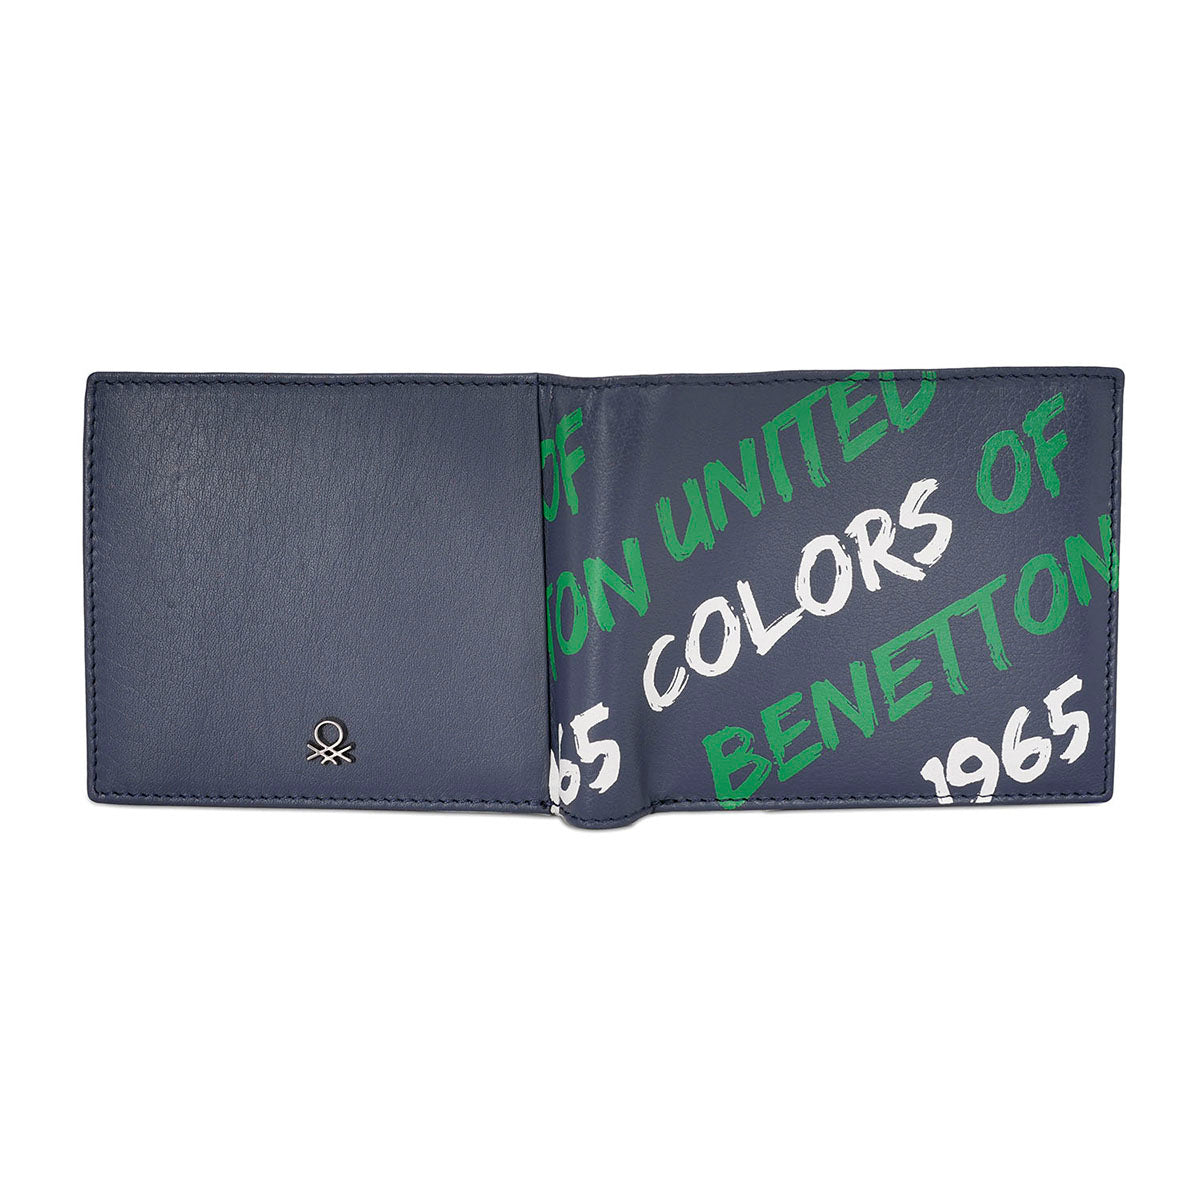 United Colors of Benetton Olson Global Coin Wallet Navy